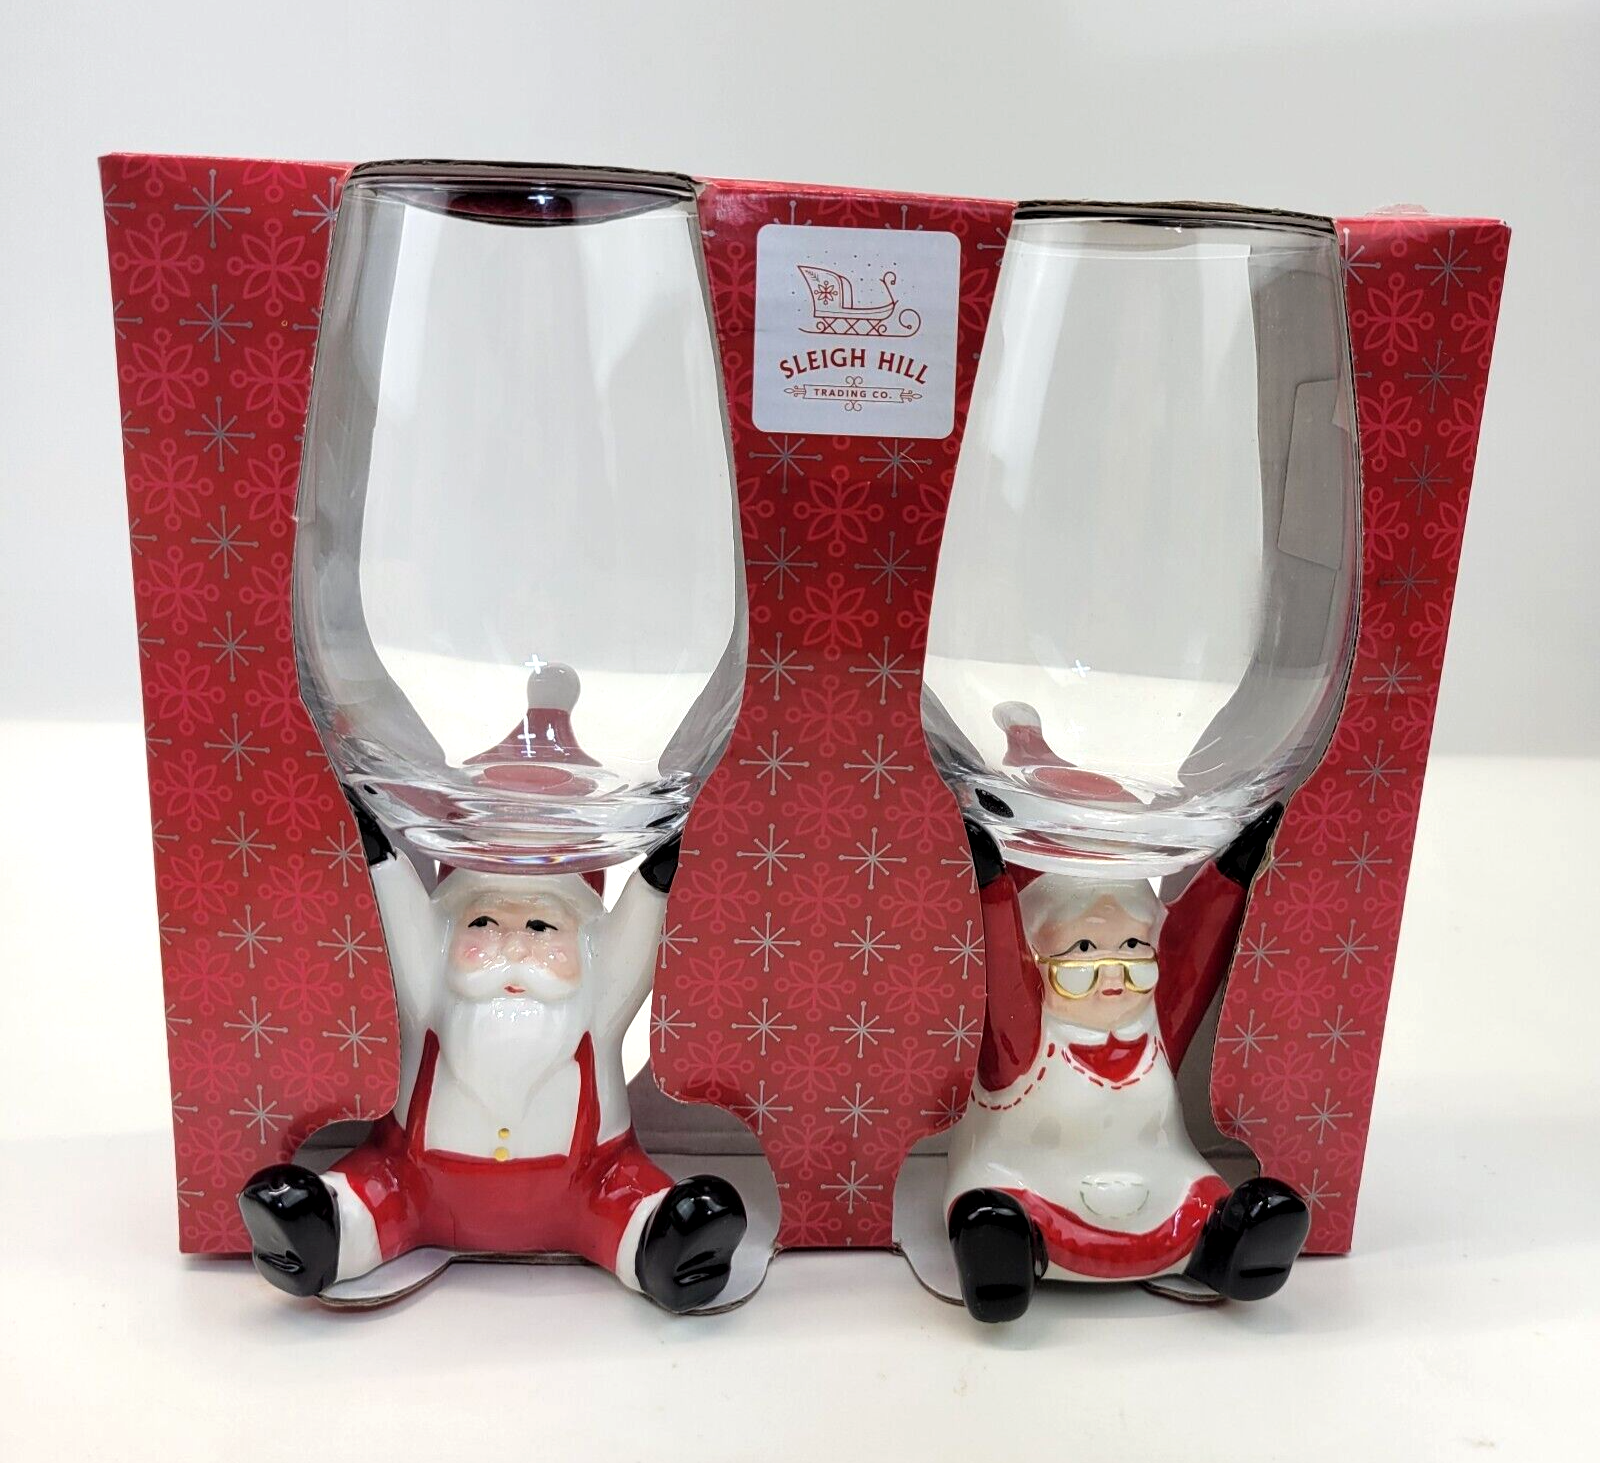 Primary image for Sleigh Hill Trading Company Santa Mrs Claus Holiday Wine Glasses 3D Sculpted NEW